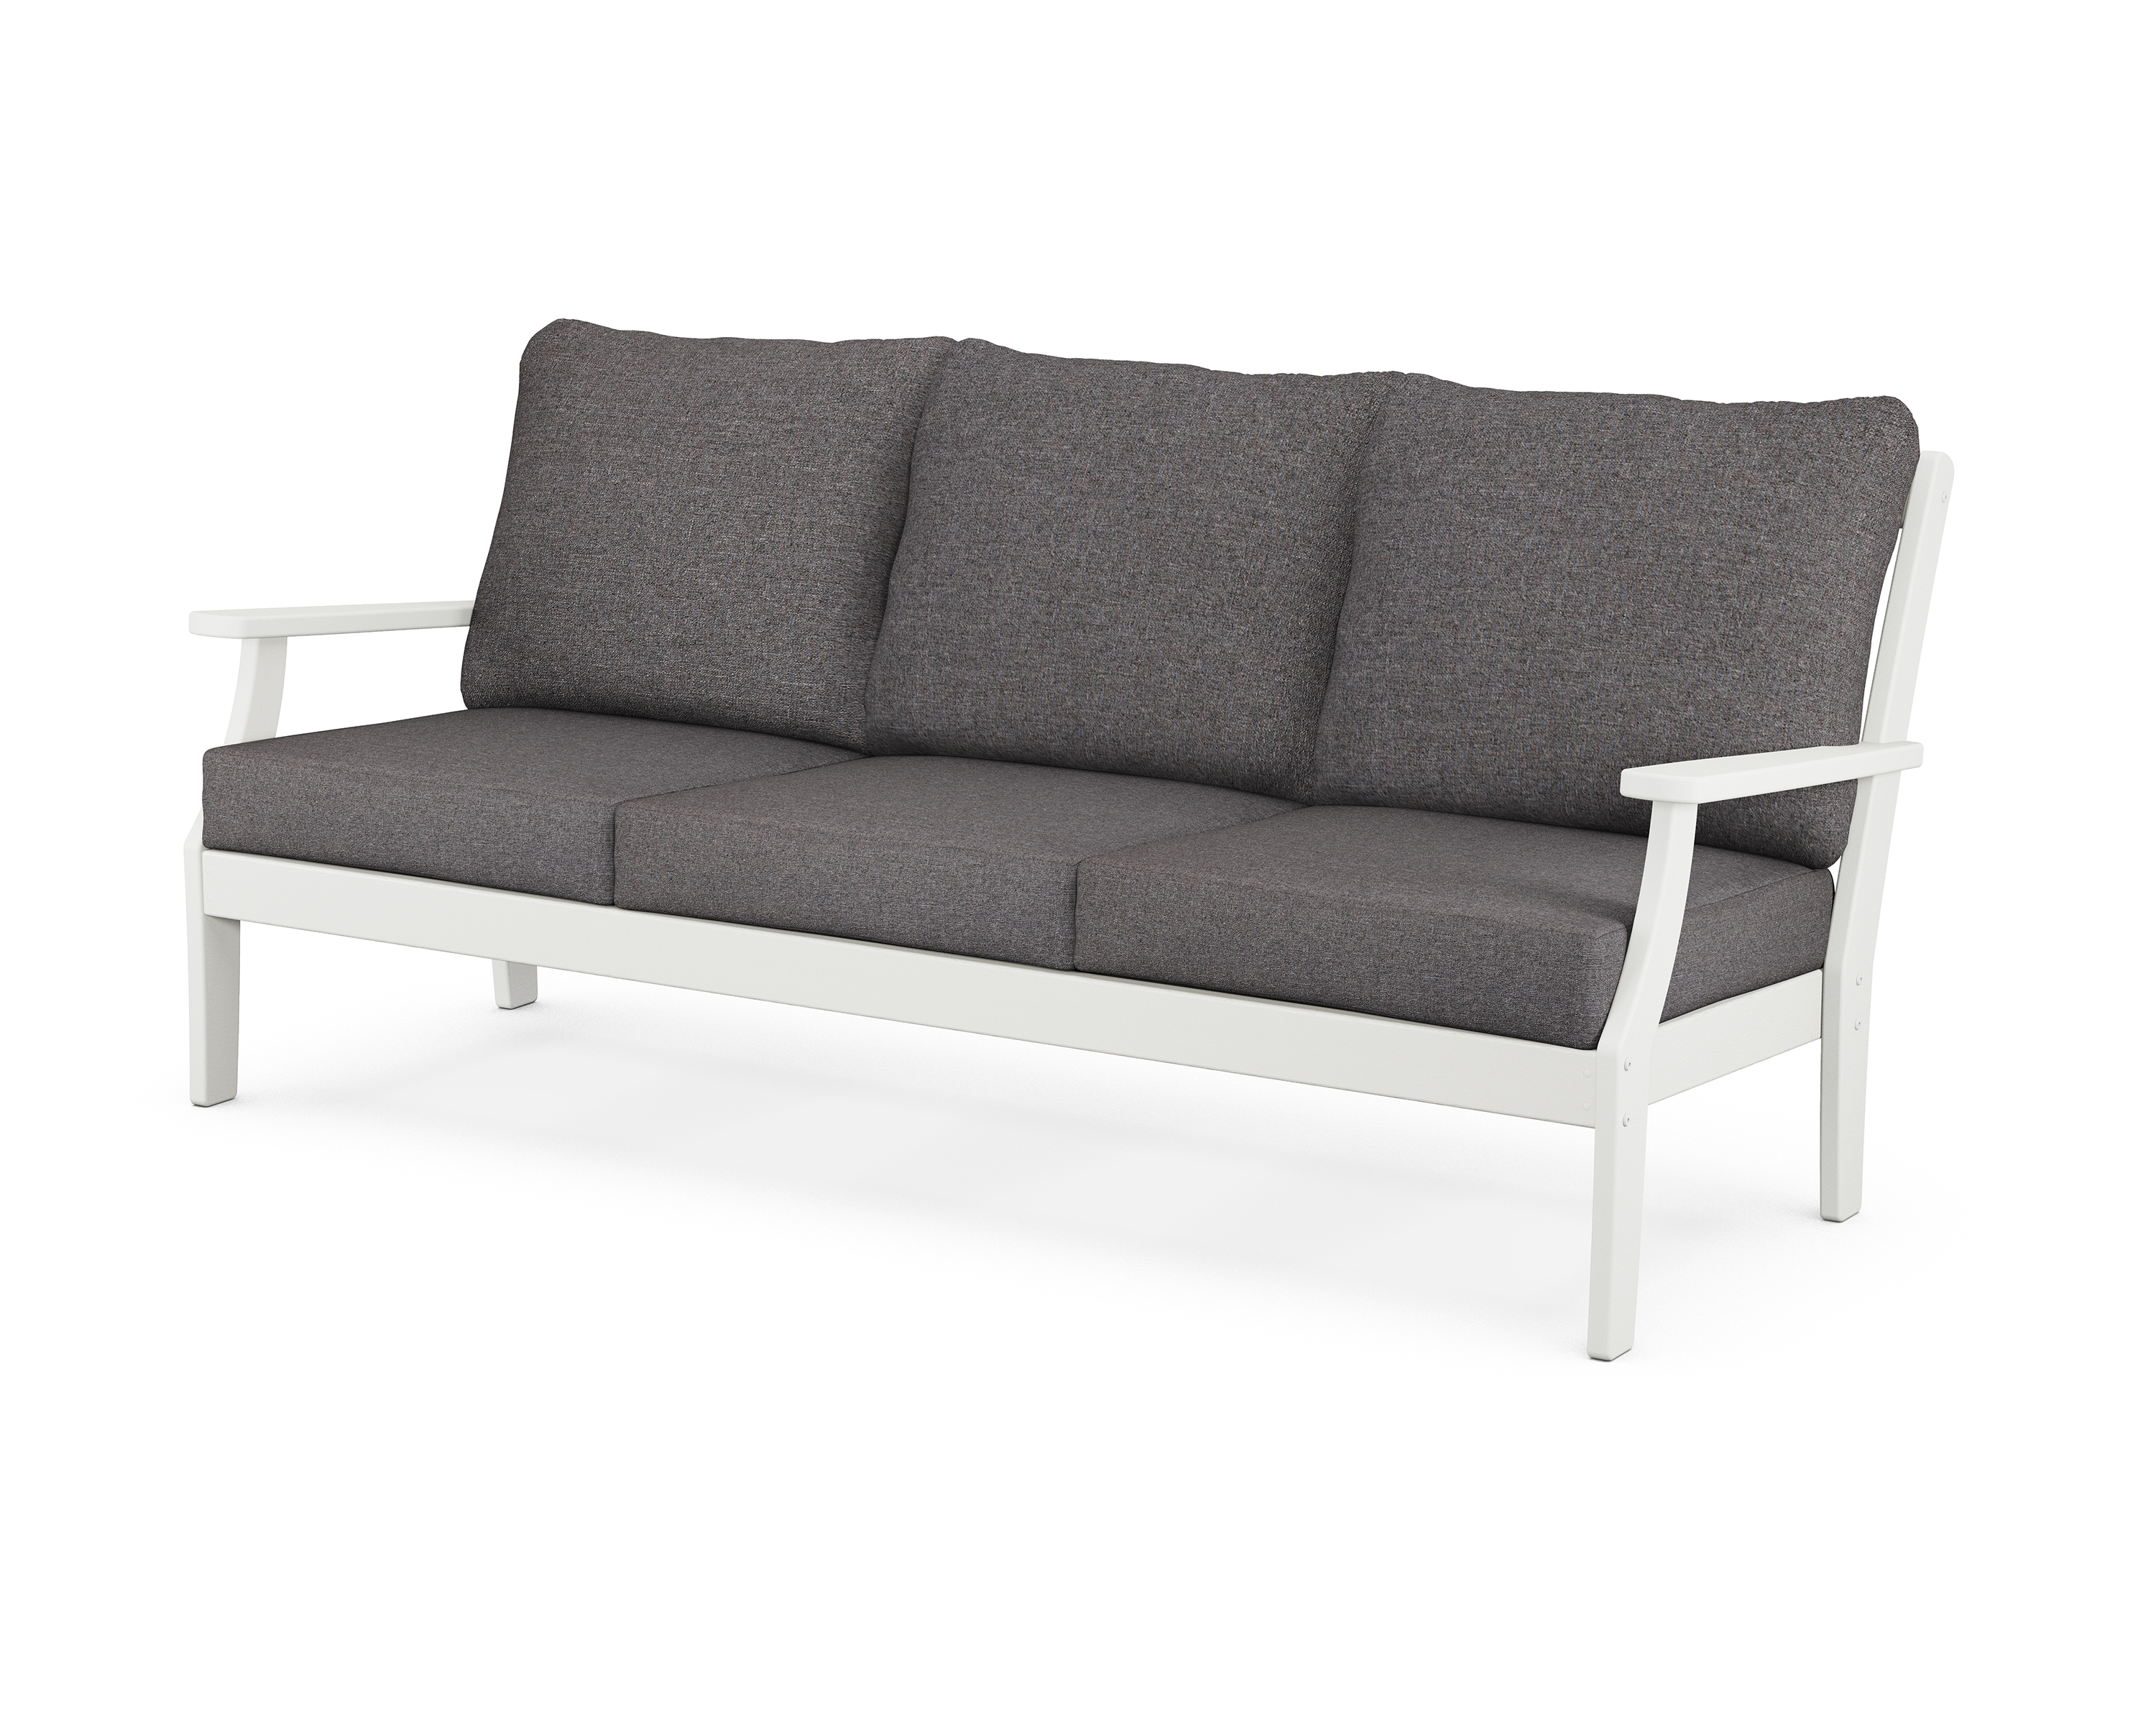 braxton deep seating sofa in vintage white / ash charcoal product image